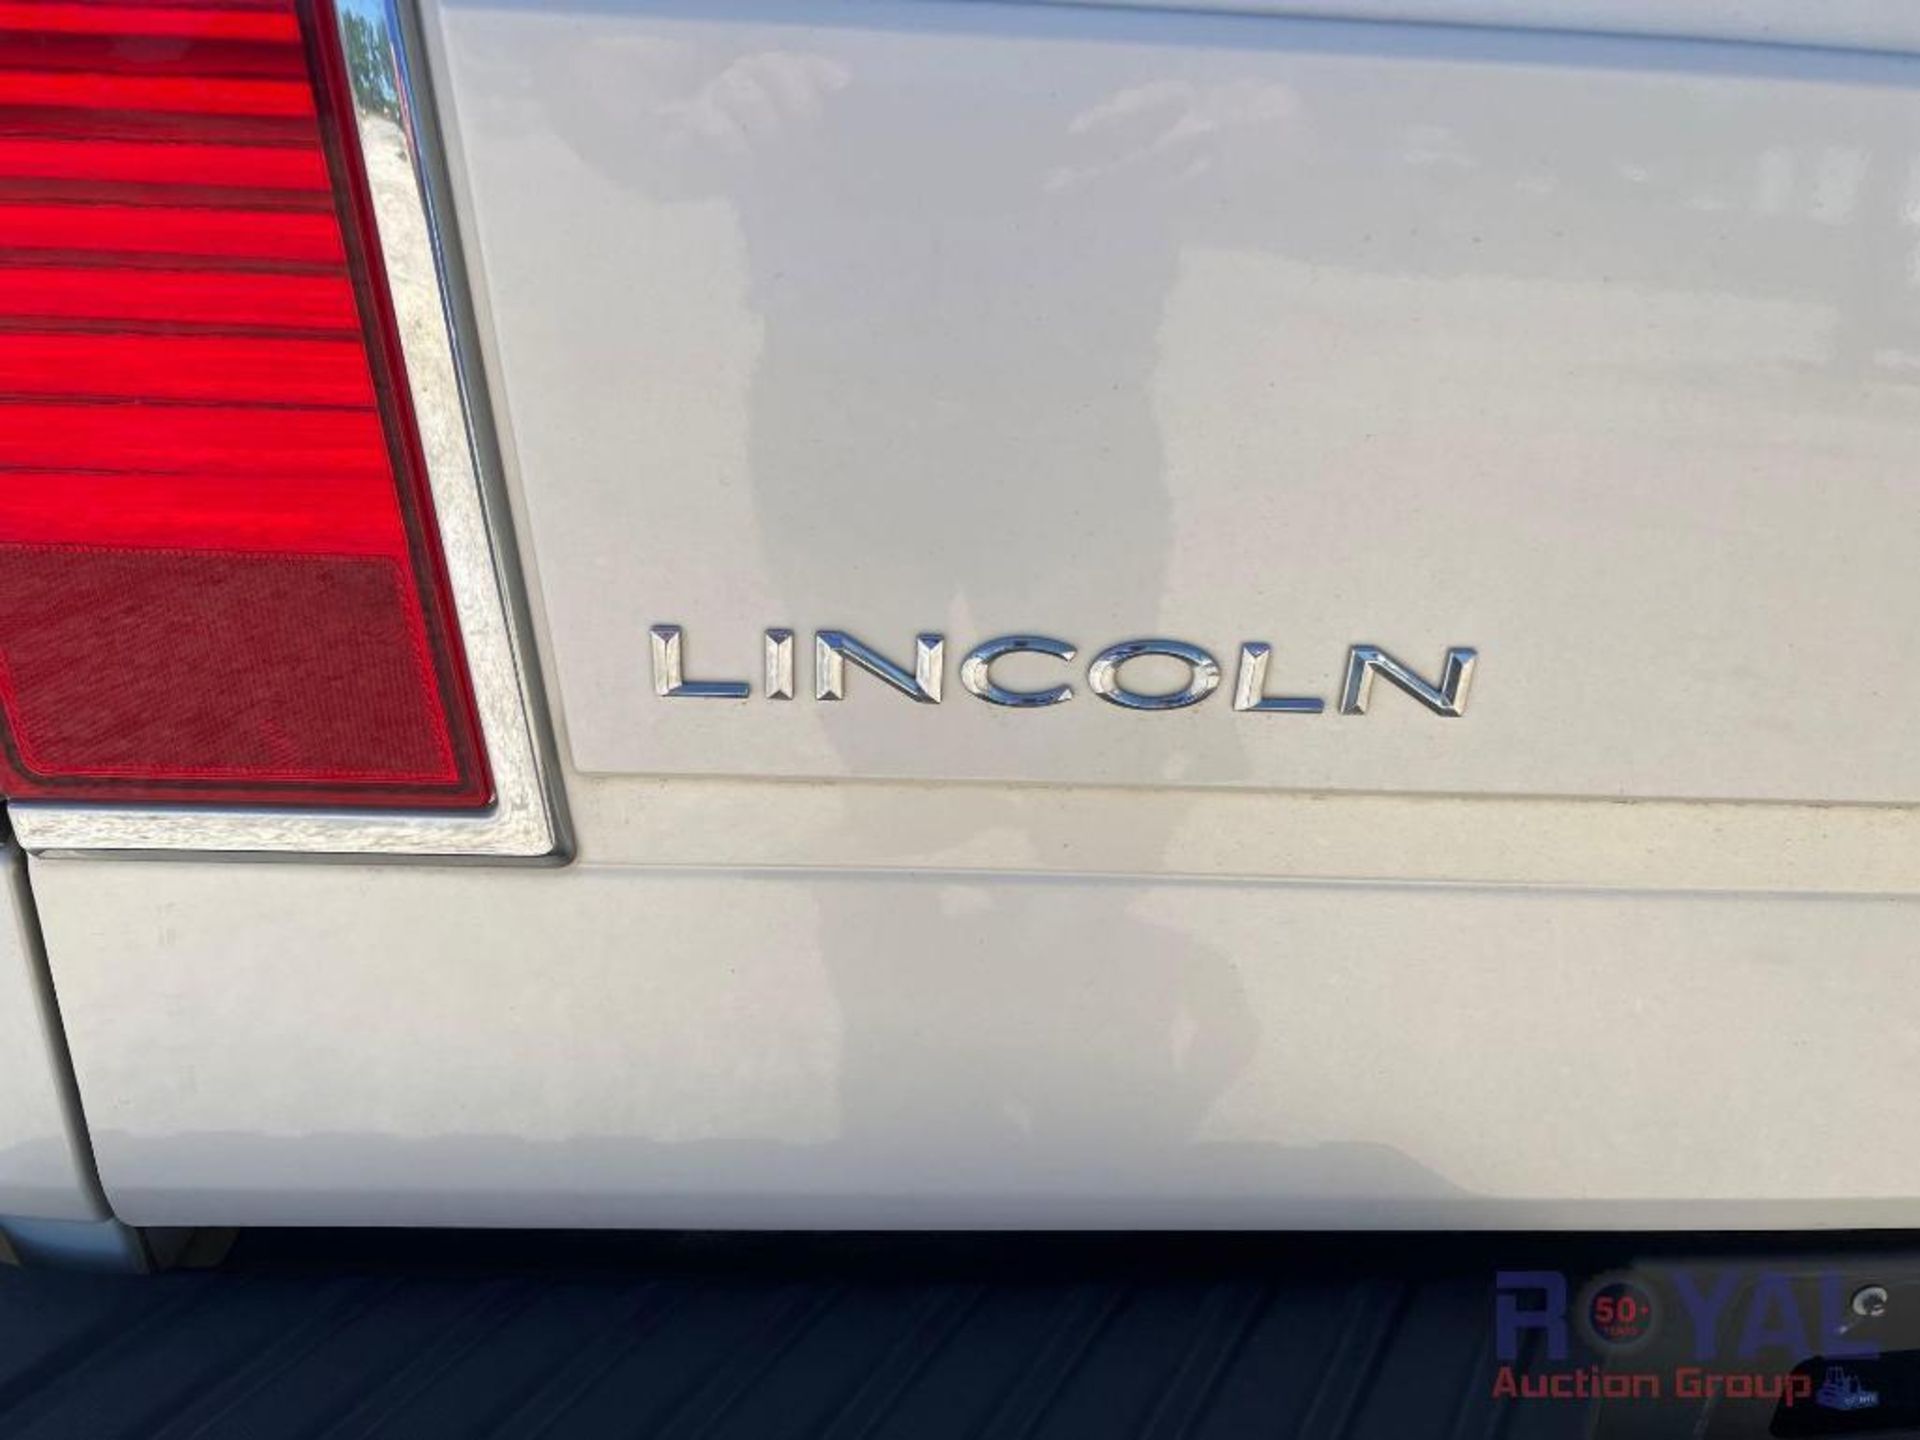 2015 Lincoln Mark LT Crew Cab Pickup Truck - Image 58 of 75